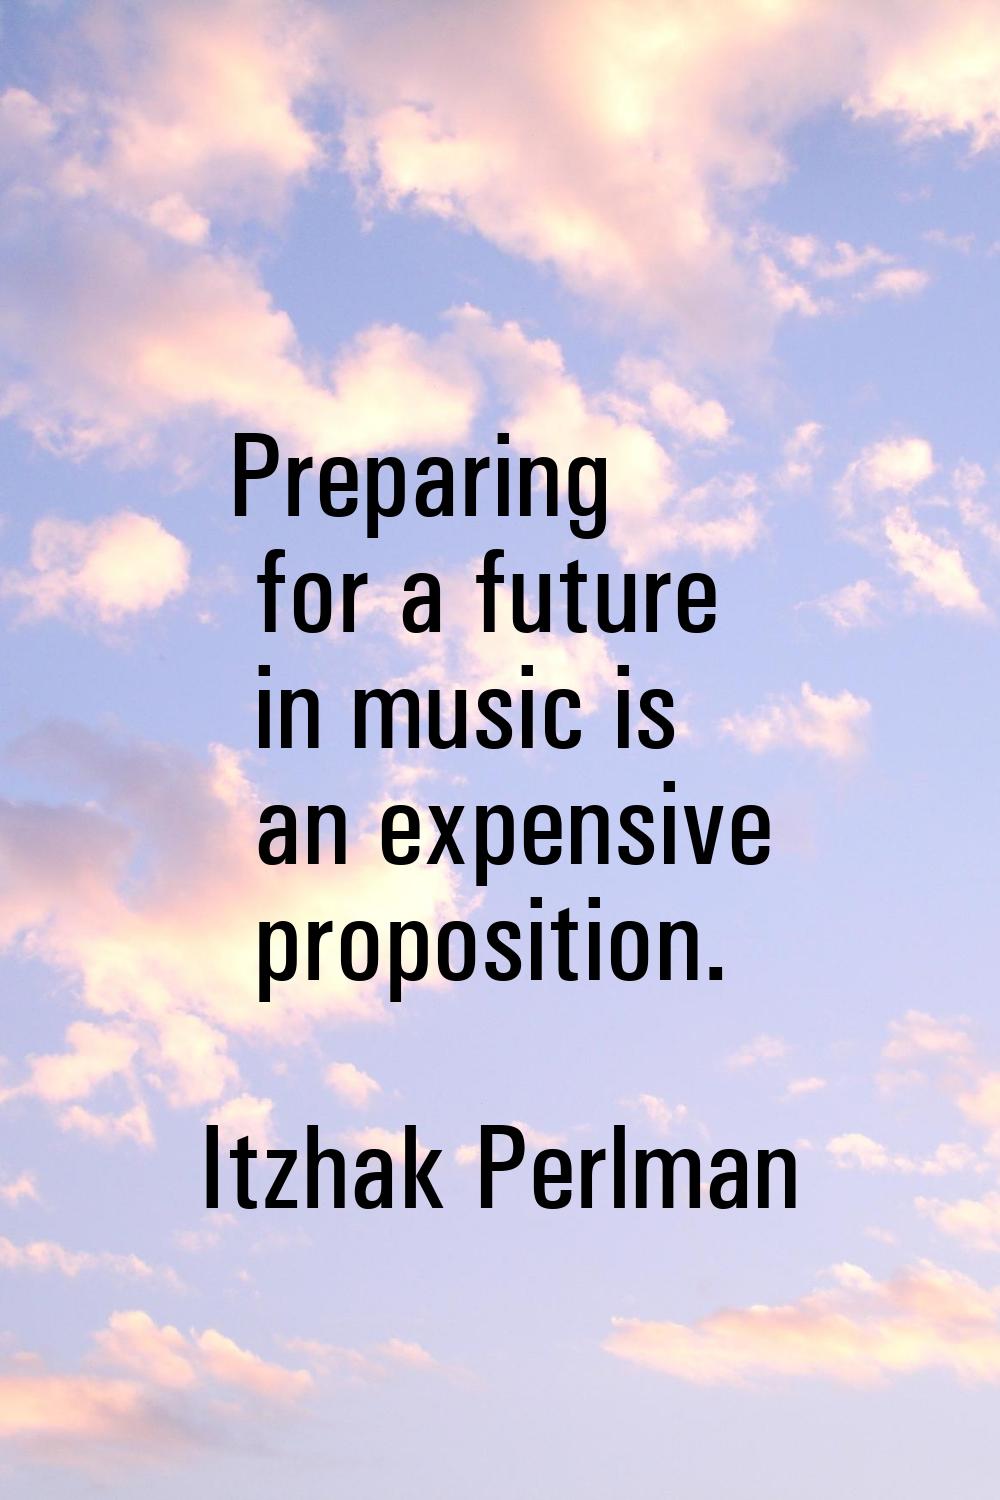 Preparing for a future in music is an expensive proposition.